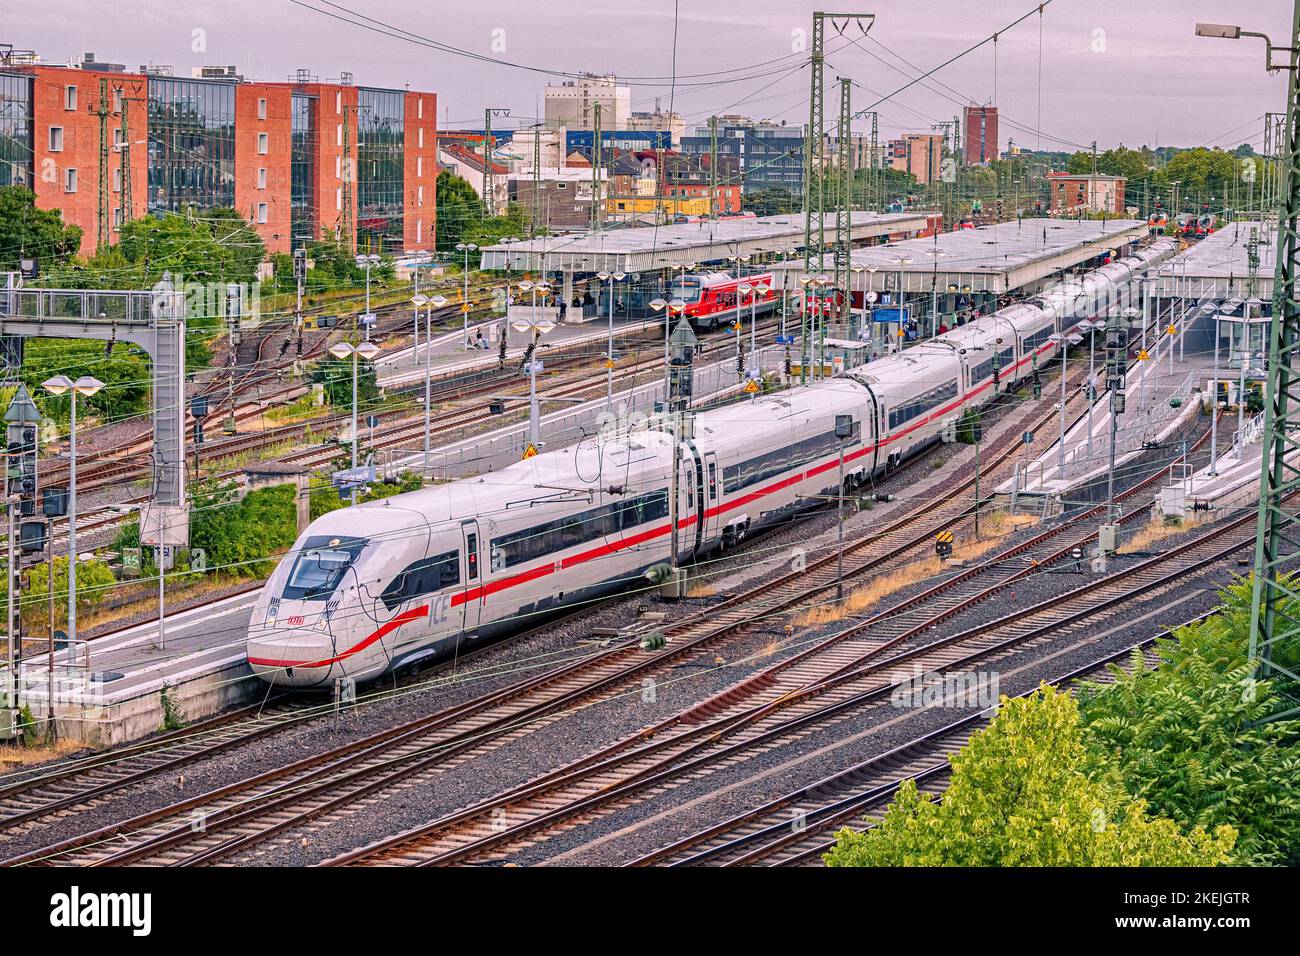 26 July 2022, Munster, Germany: modern high speed intercity DB Deutche Bahn train carries passengers. Branching of railway rails near stations and pla Stock Photo